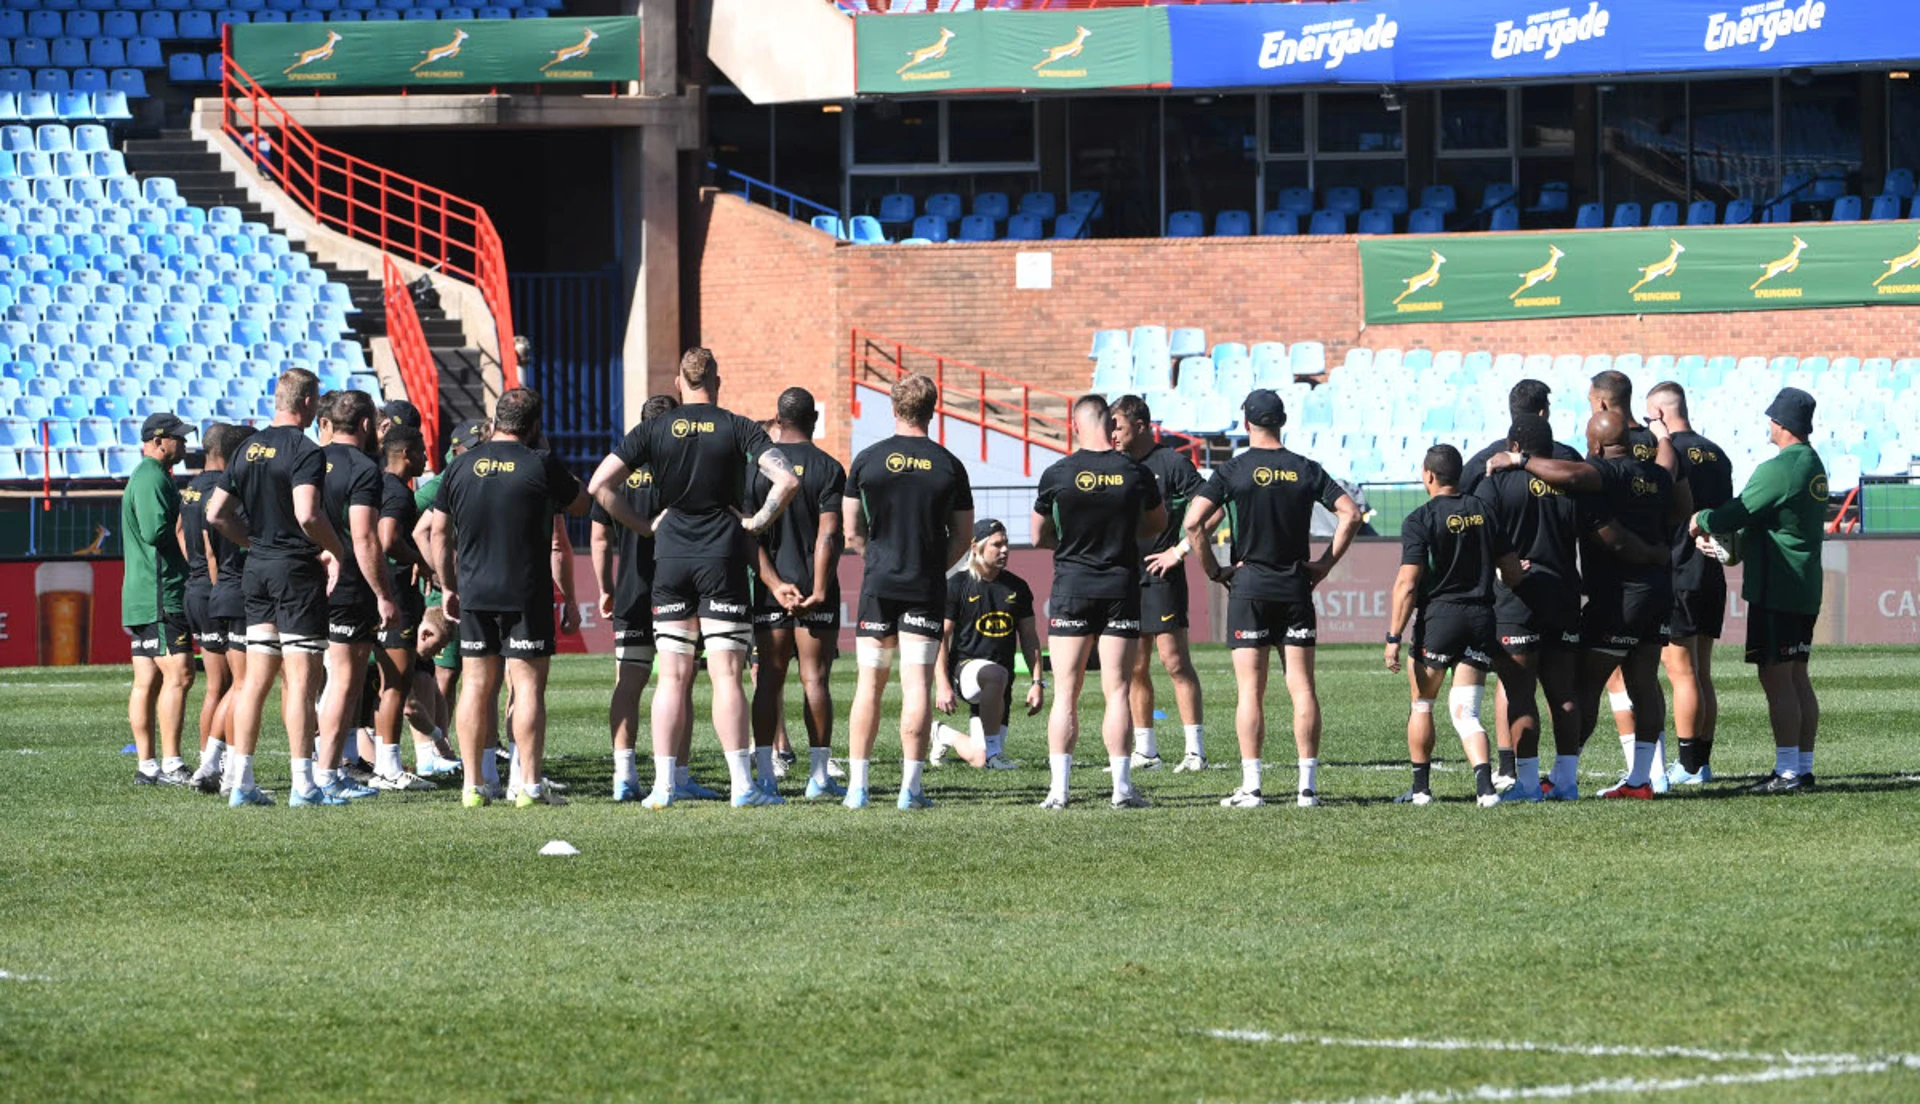 LOFTUS TEST: For the Boks this is personal, but not for the reason you may think